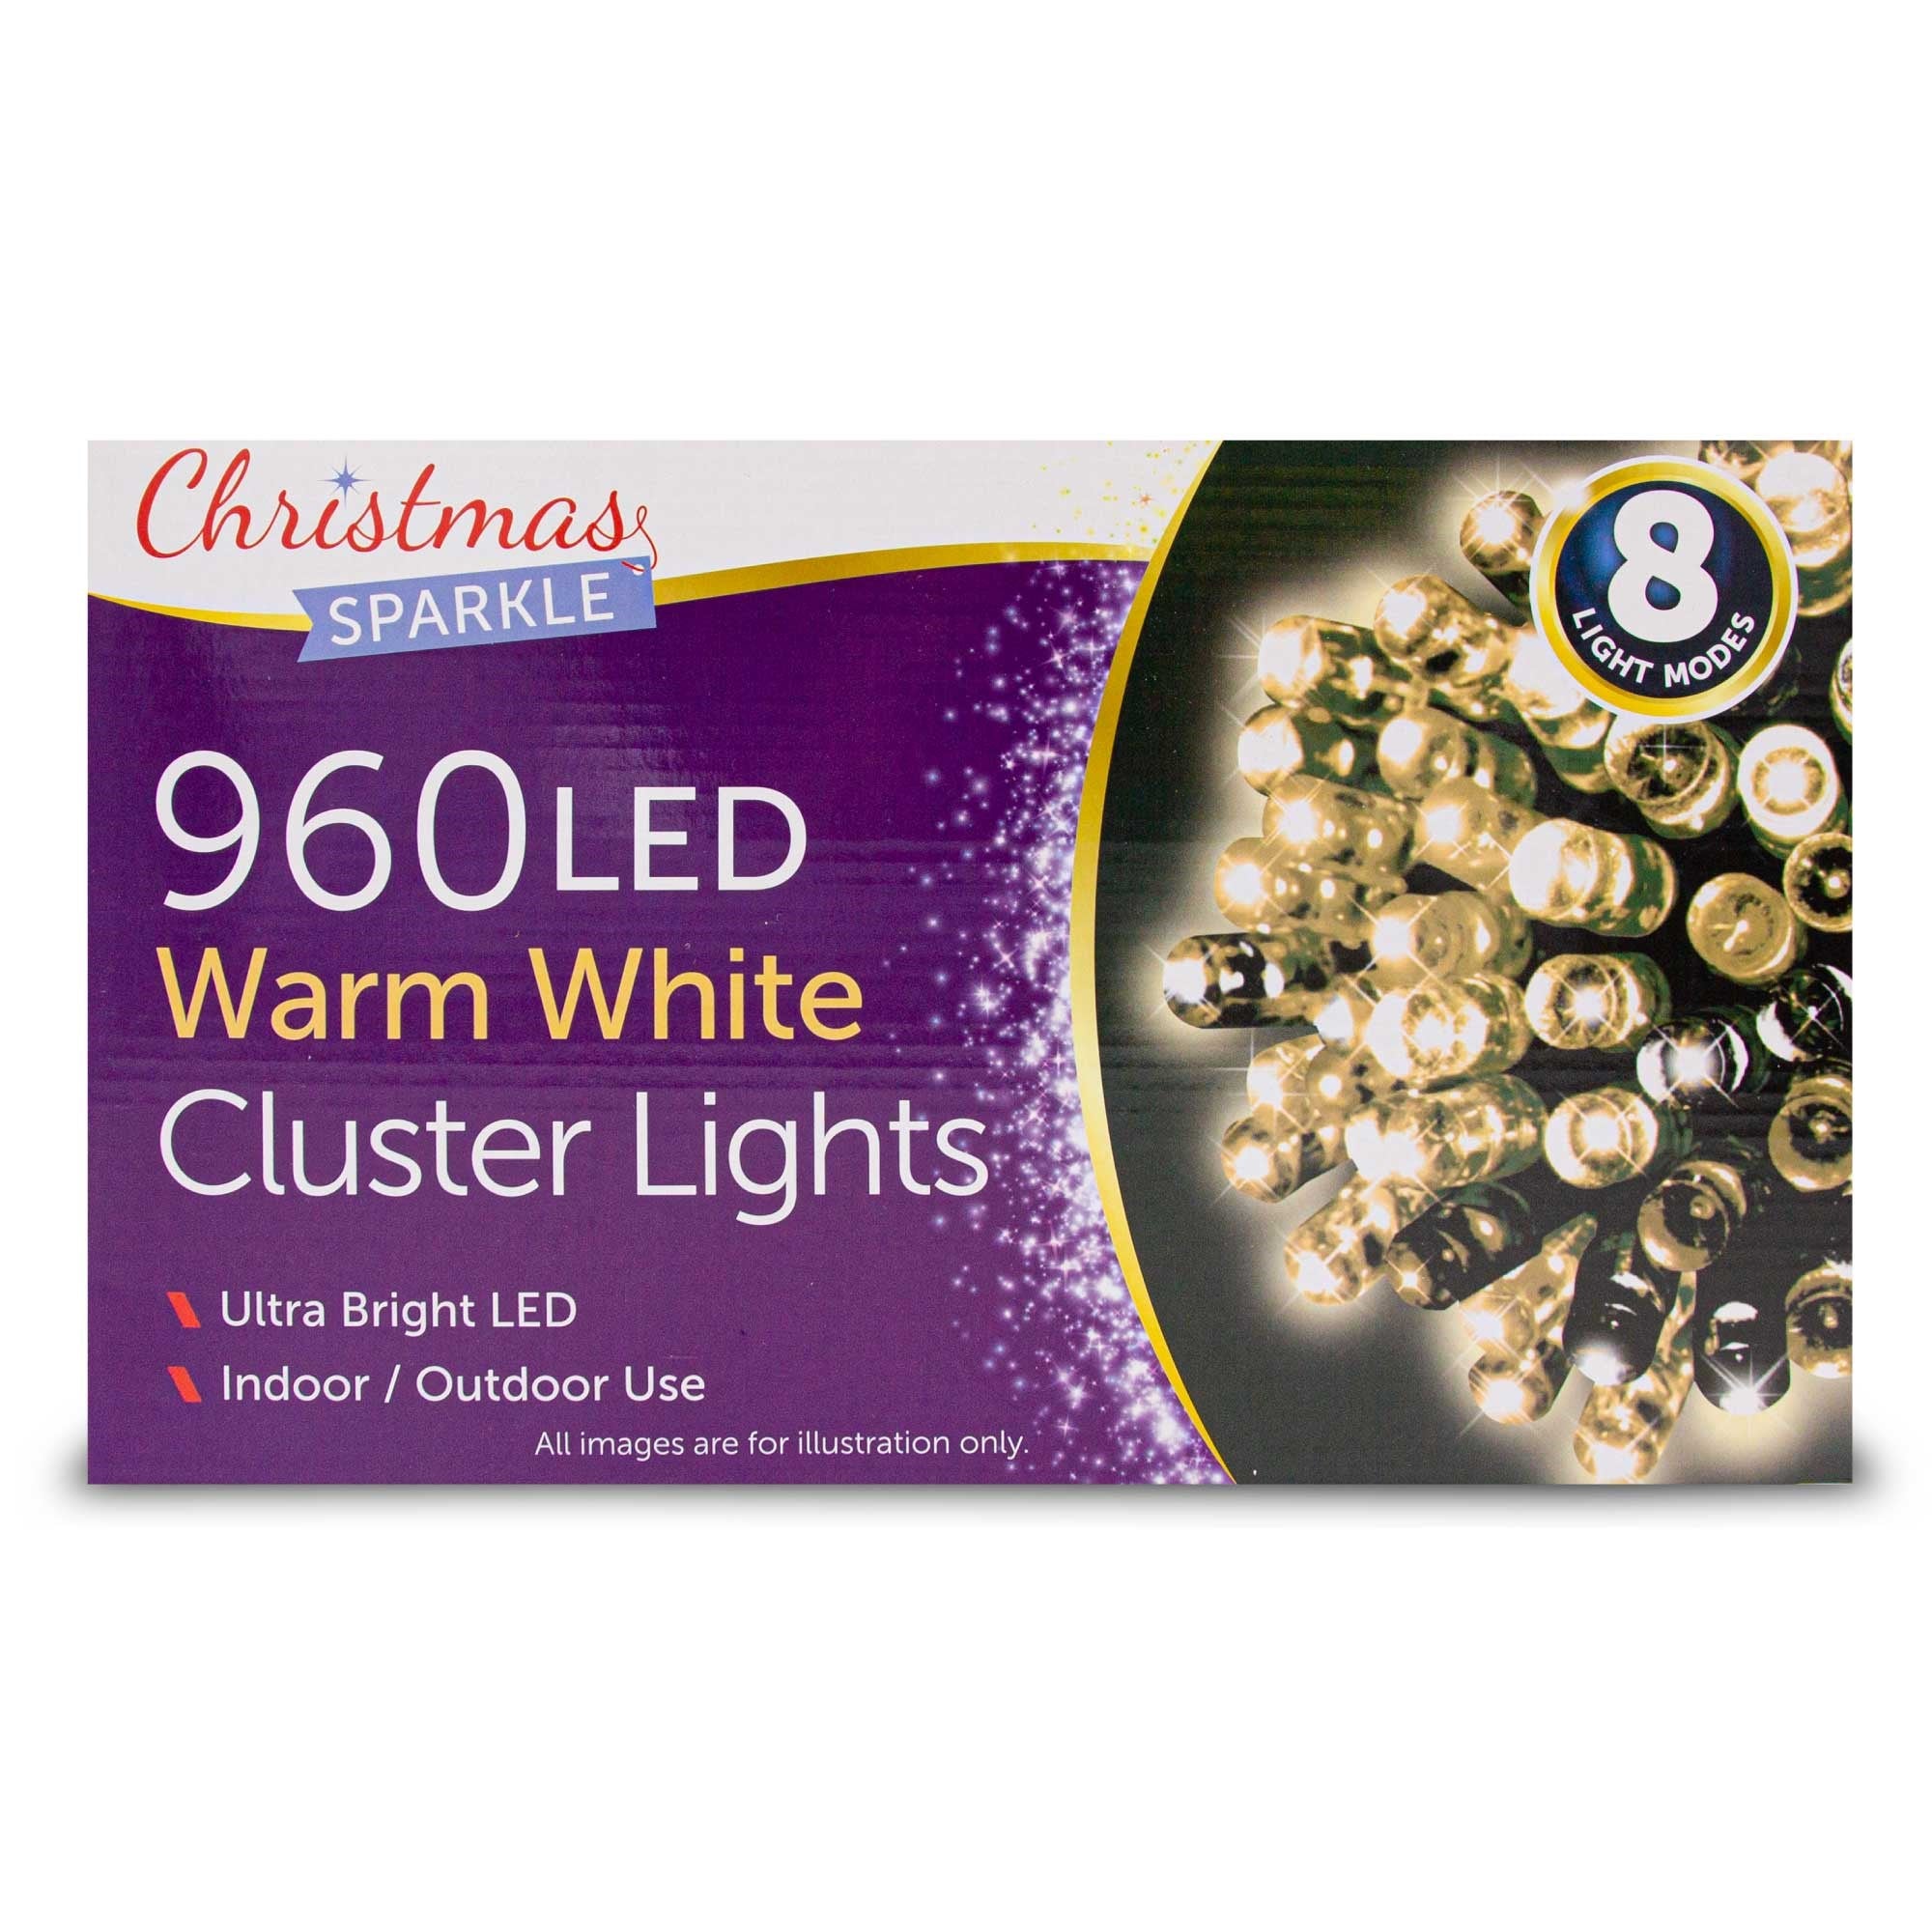 Christmas Sparkle Indoor and Outdoor Cluster Lights x 960 with Warm White LEDs - Mains Operated  | TJ Hughes